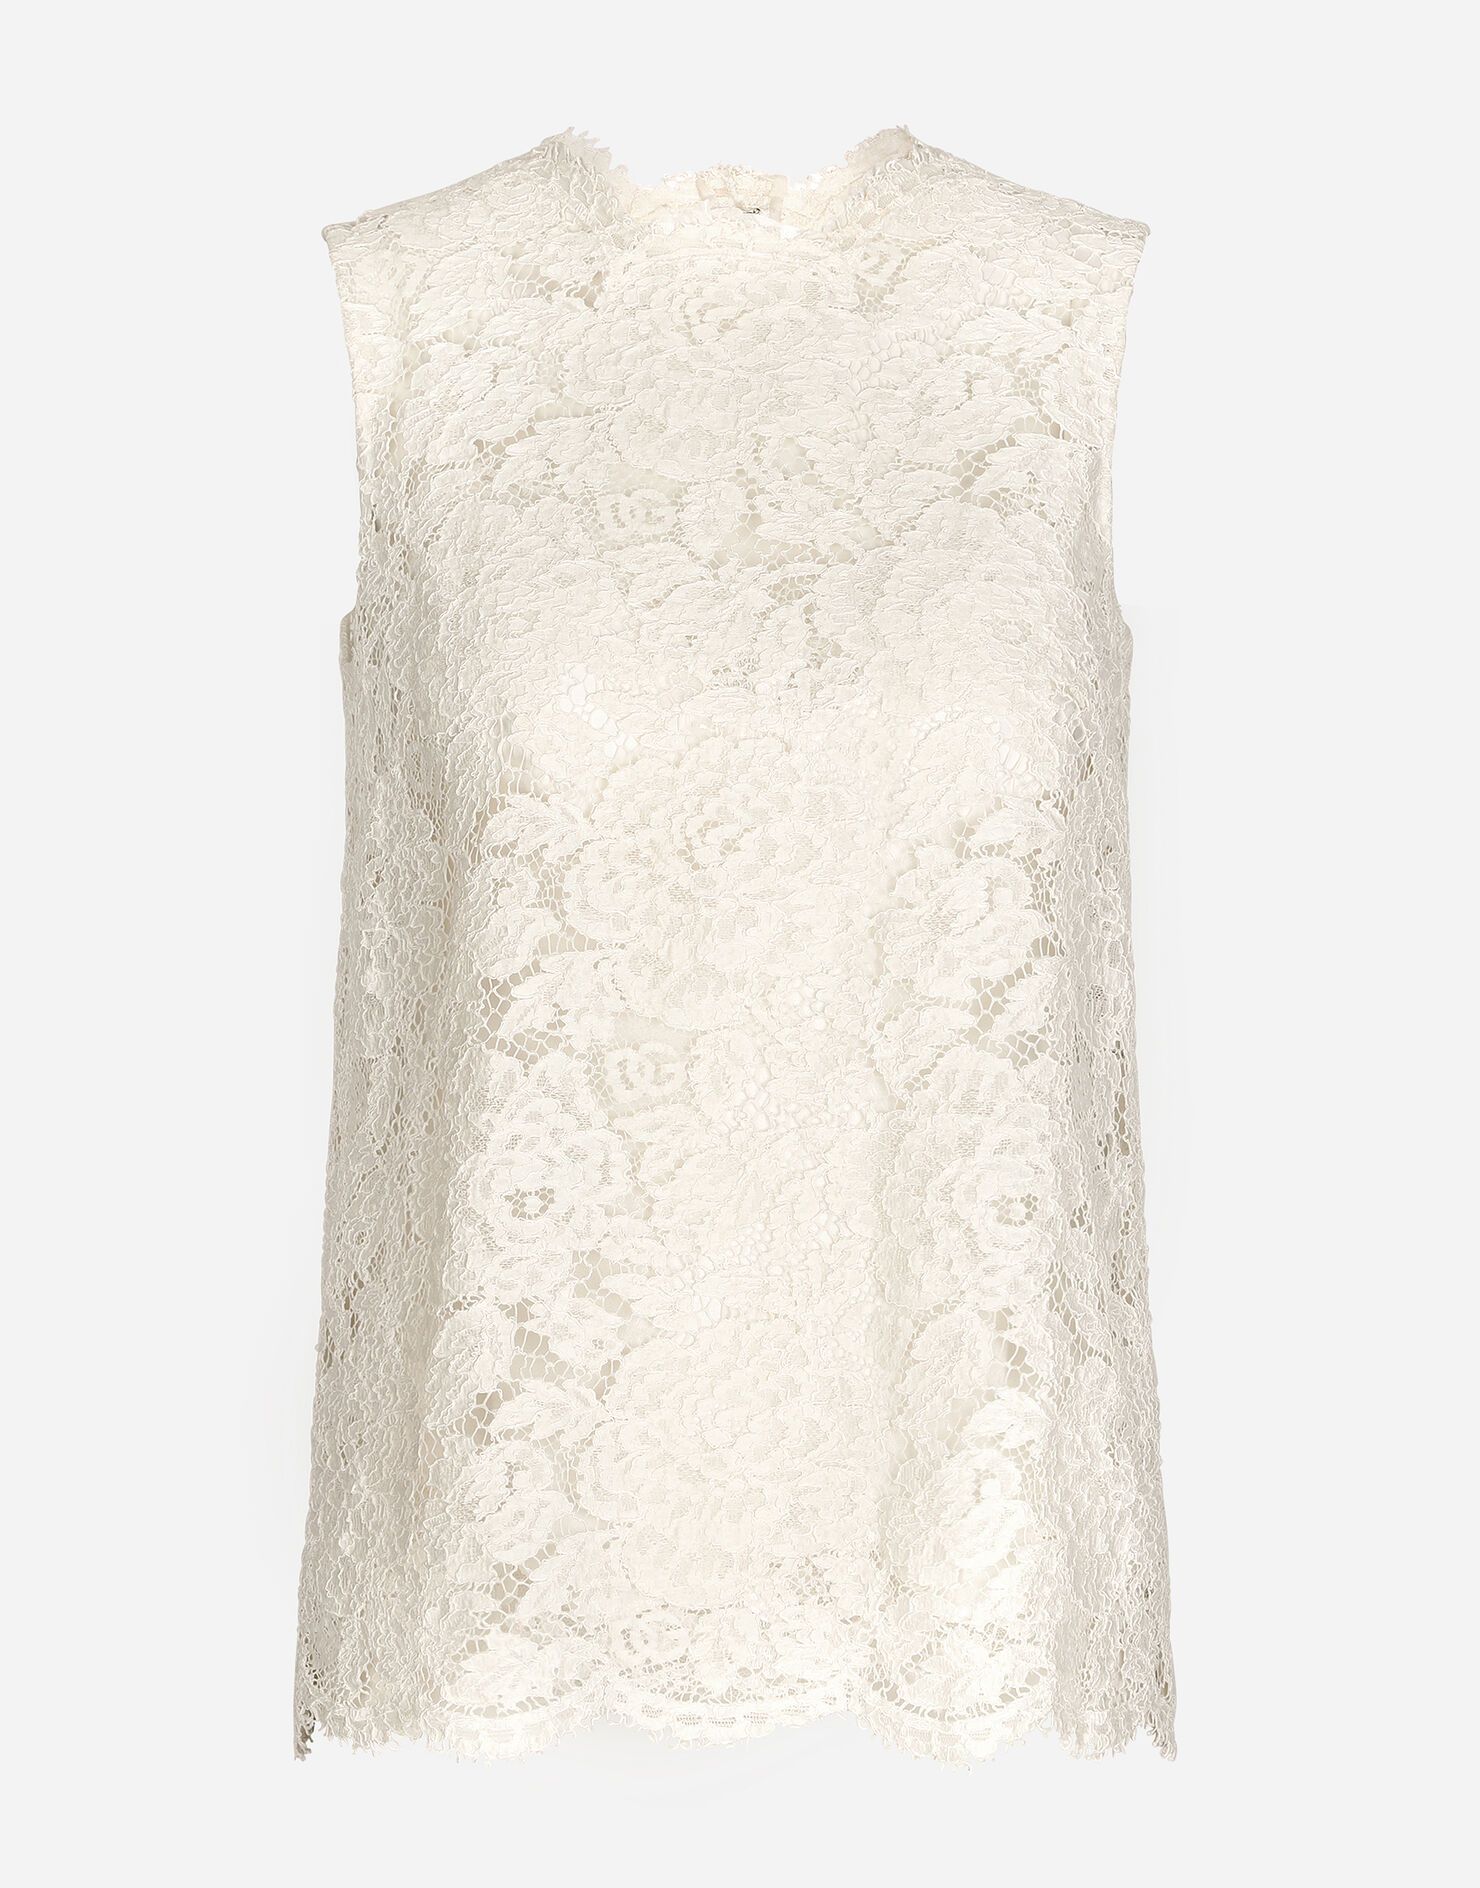 Branded stretch lace top | Dolce & Gabbana - INT